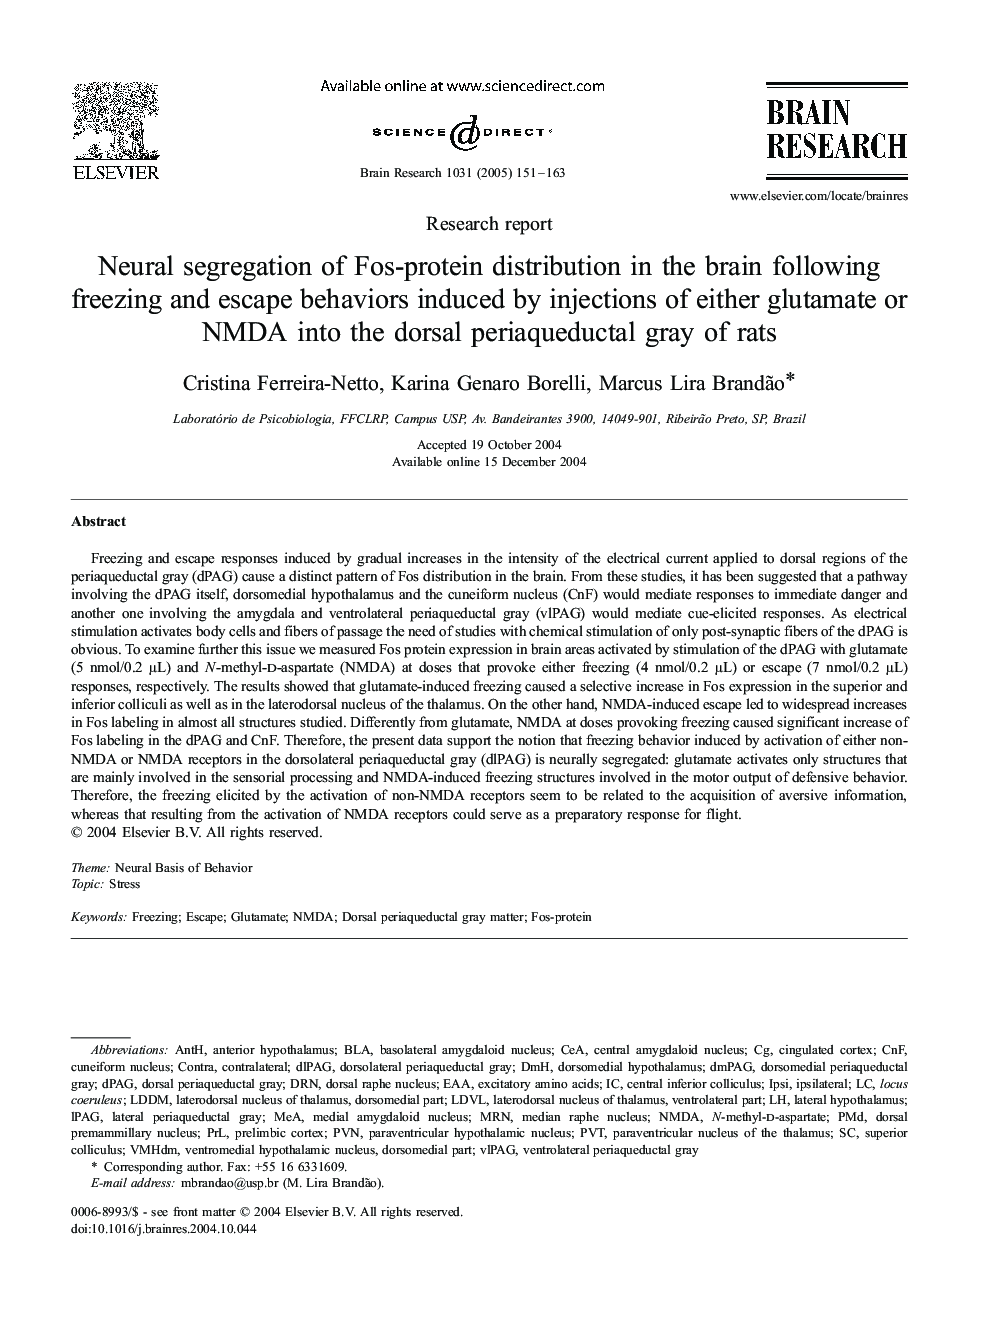 Neural segregation of Fos-protein distribution in the brain following freezing and escape behaviors induced by injections of either glutamate or NMDA into the dorsal periaqueductal gray of rats